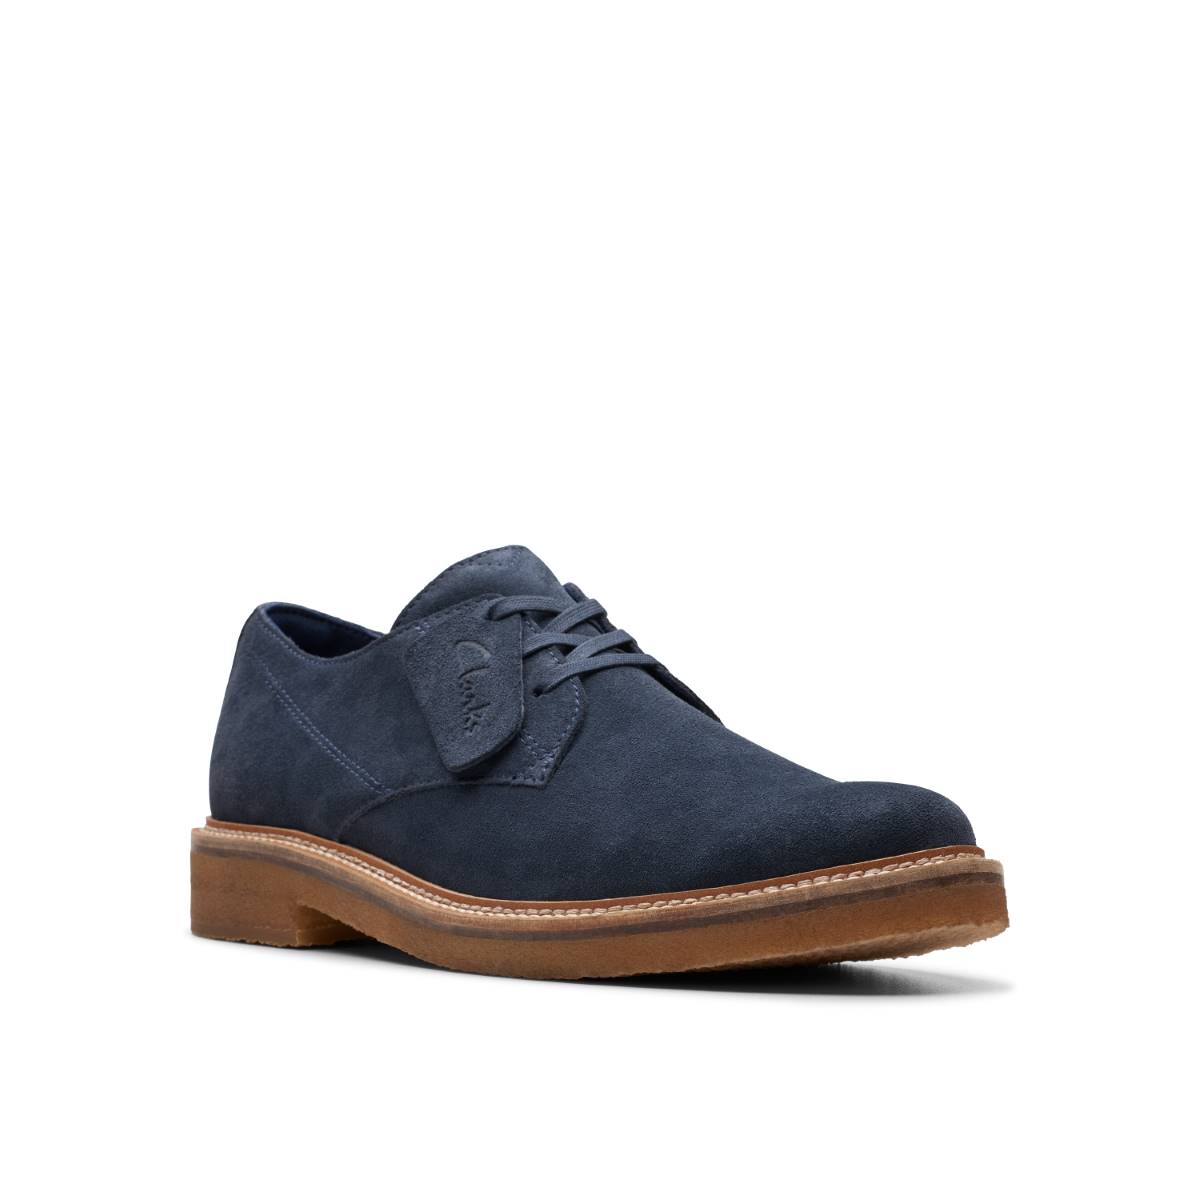 Clarks Clarkdale Derby Navy Suede Mens comfort shoes 7610-97G in a Plain Leather in Size 11